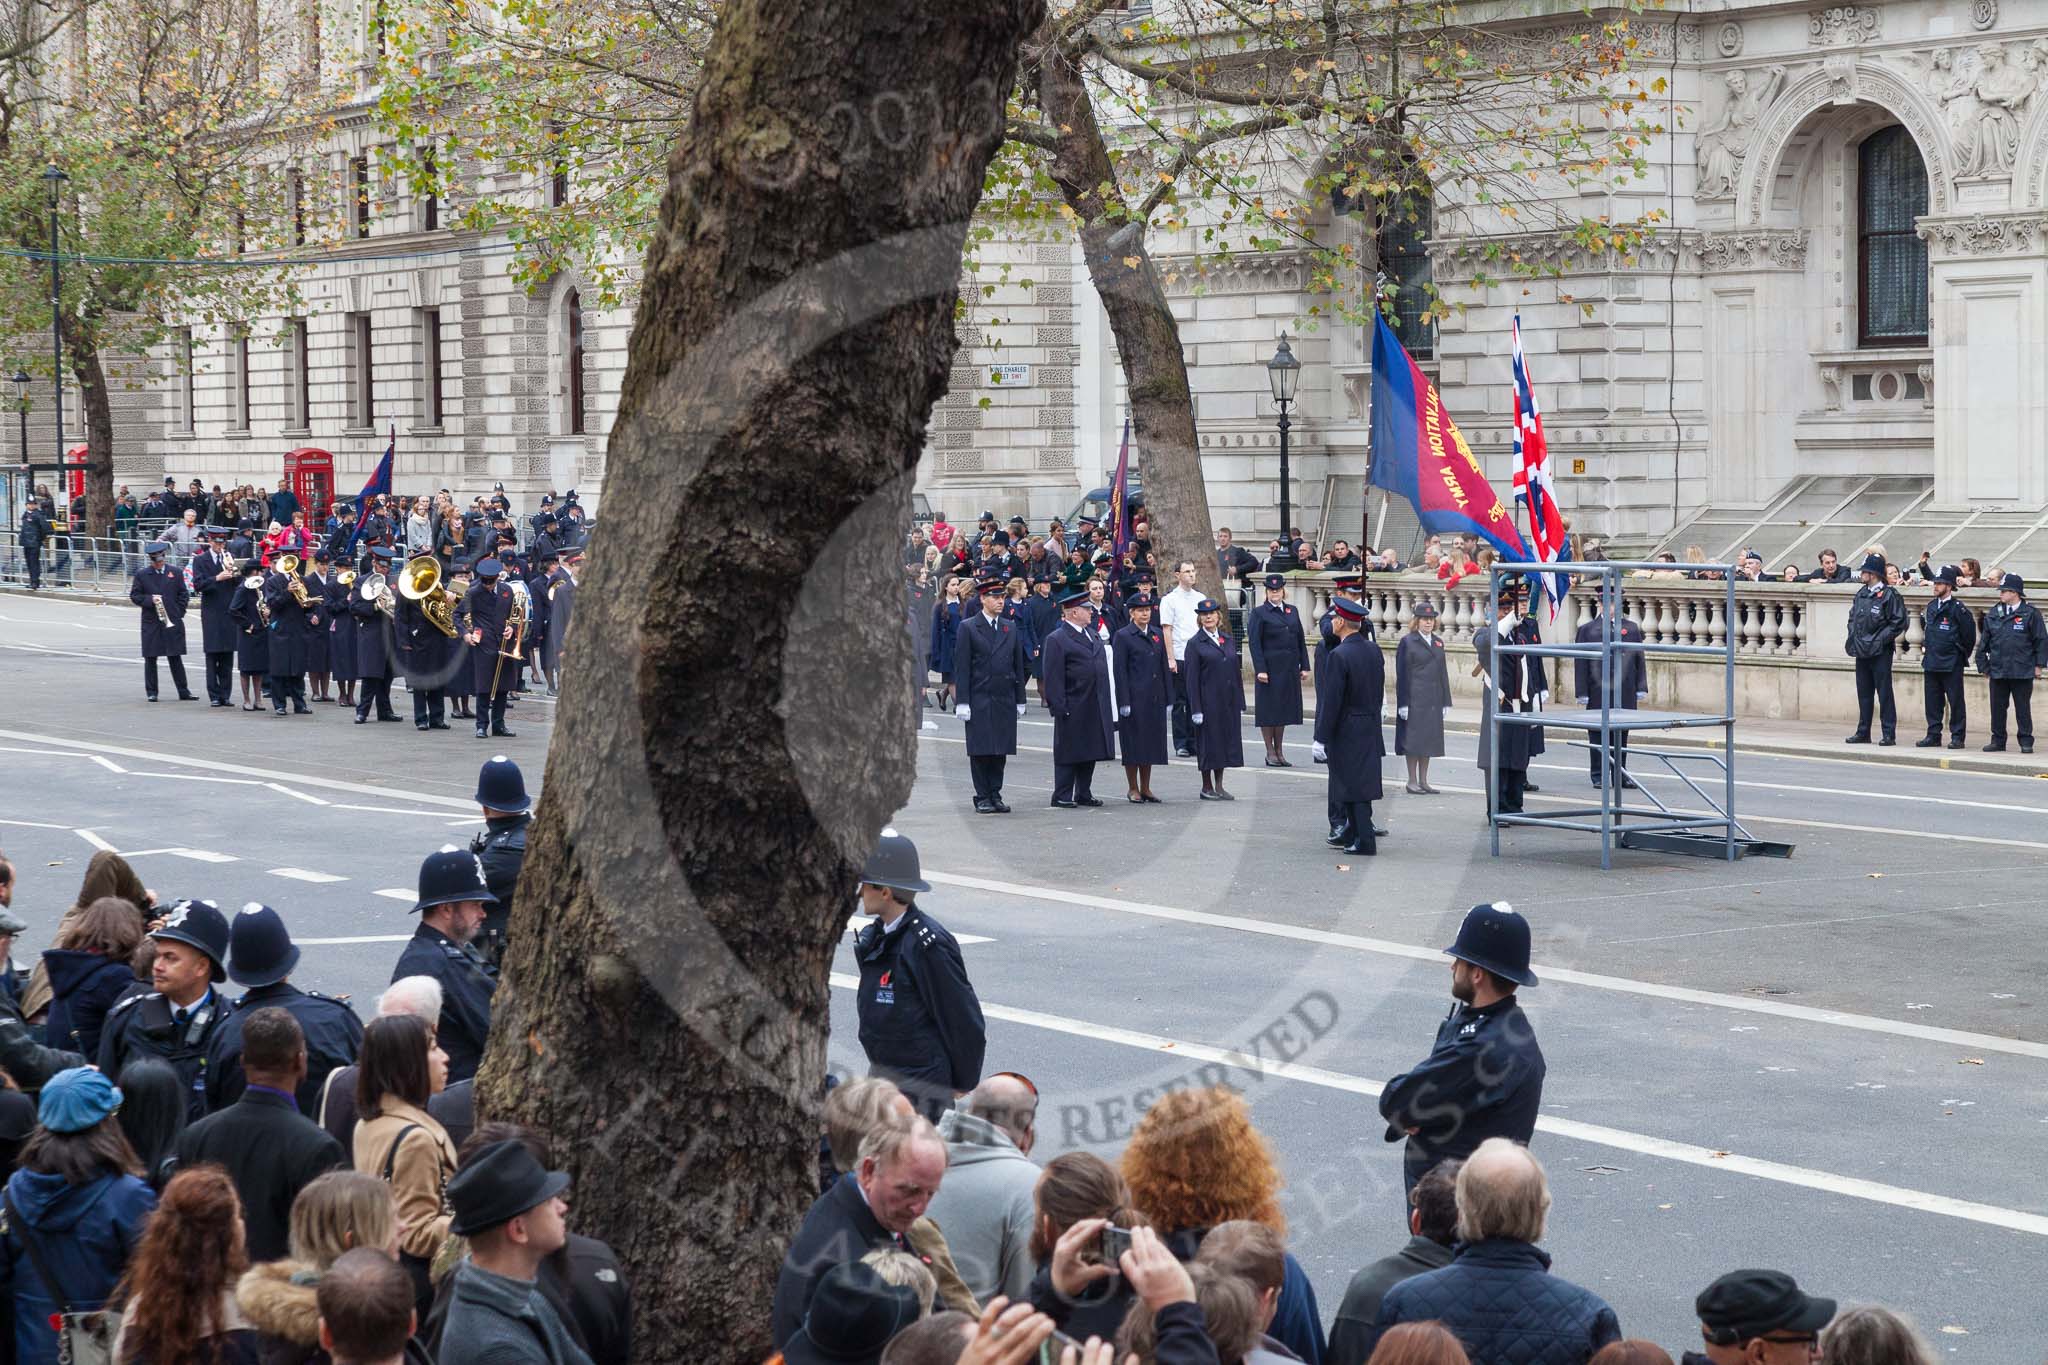 Remembrance Sunday at the Cenotaph 2015: Regent Hall Salvation Army conduct their annual service of Remembrance at the Cenotaph. Regent Hall is the only church on Oxford Street in Central London, they pay their respects, as a local presence, separately from the national representatives that take part in the official March Past. Image #390, 08 November 2015 13:09 Whitehall, London, UK